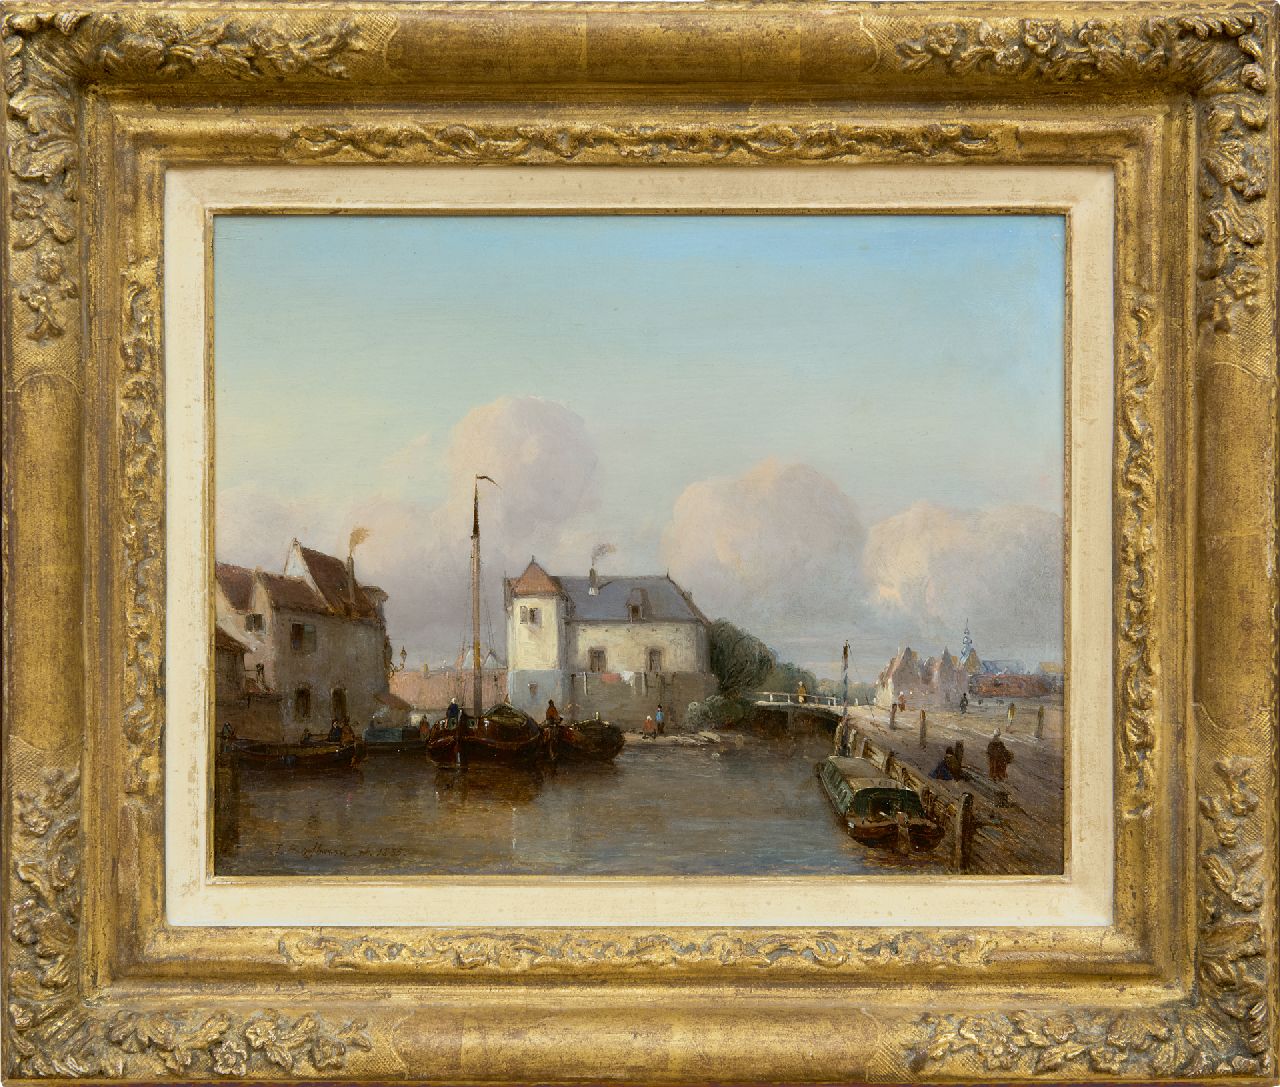 Bosboom J.  | Johannes Bosboom | Paintings offered for sale | A Dutch inner port, oil on panel 24.8 x 31.7 cm, signed l.l. and dated 1835